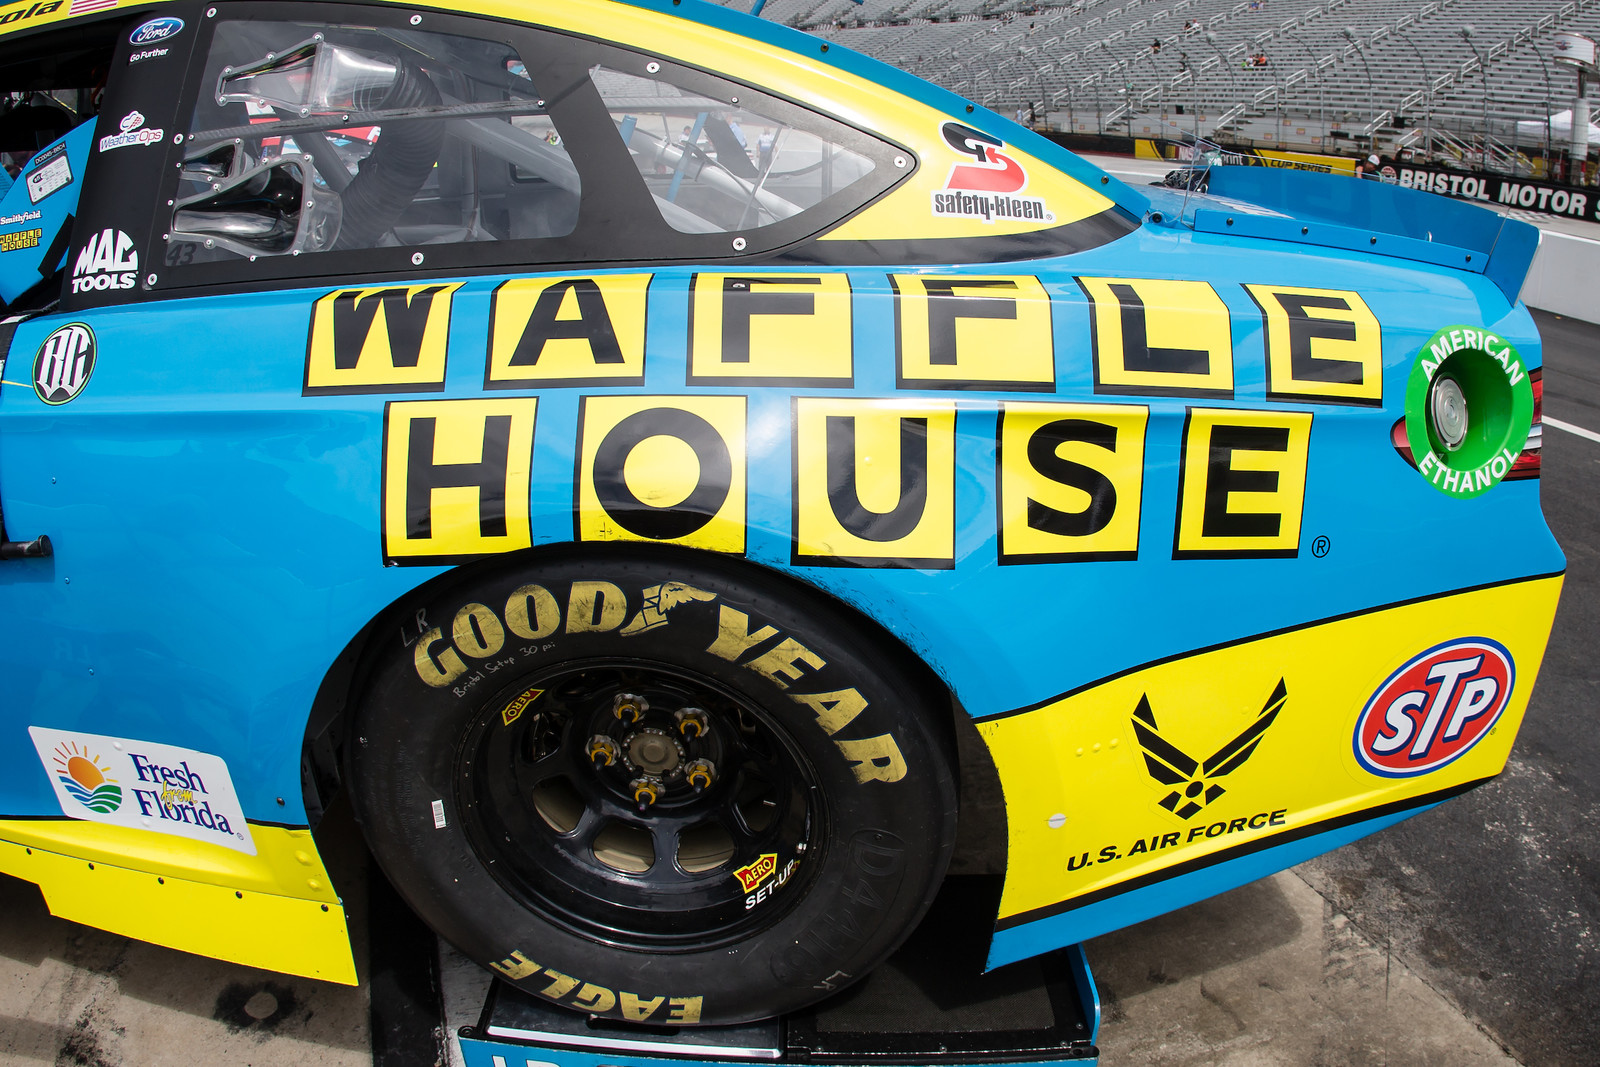 For the first time in history, Waffle House is decorated as primary sponsor the #43 Richard Petty Motorsports Ford Fusion with the breakfast chain's own primary paint scheme!
Photo taken at Bristol Motor Speedway by Brad Schloss